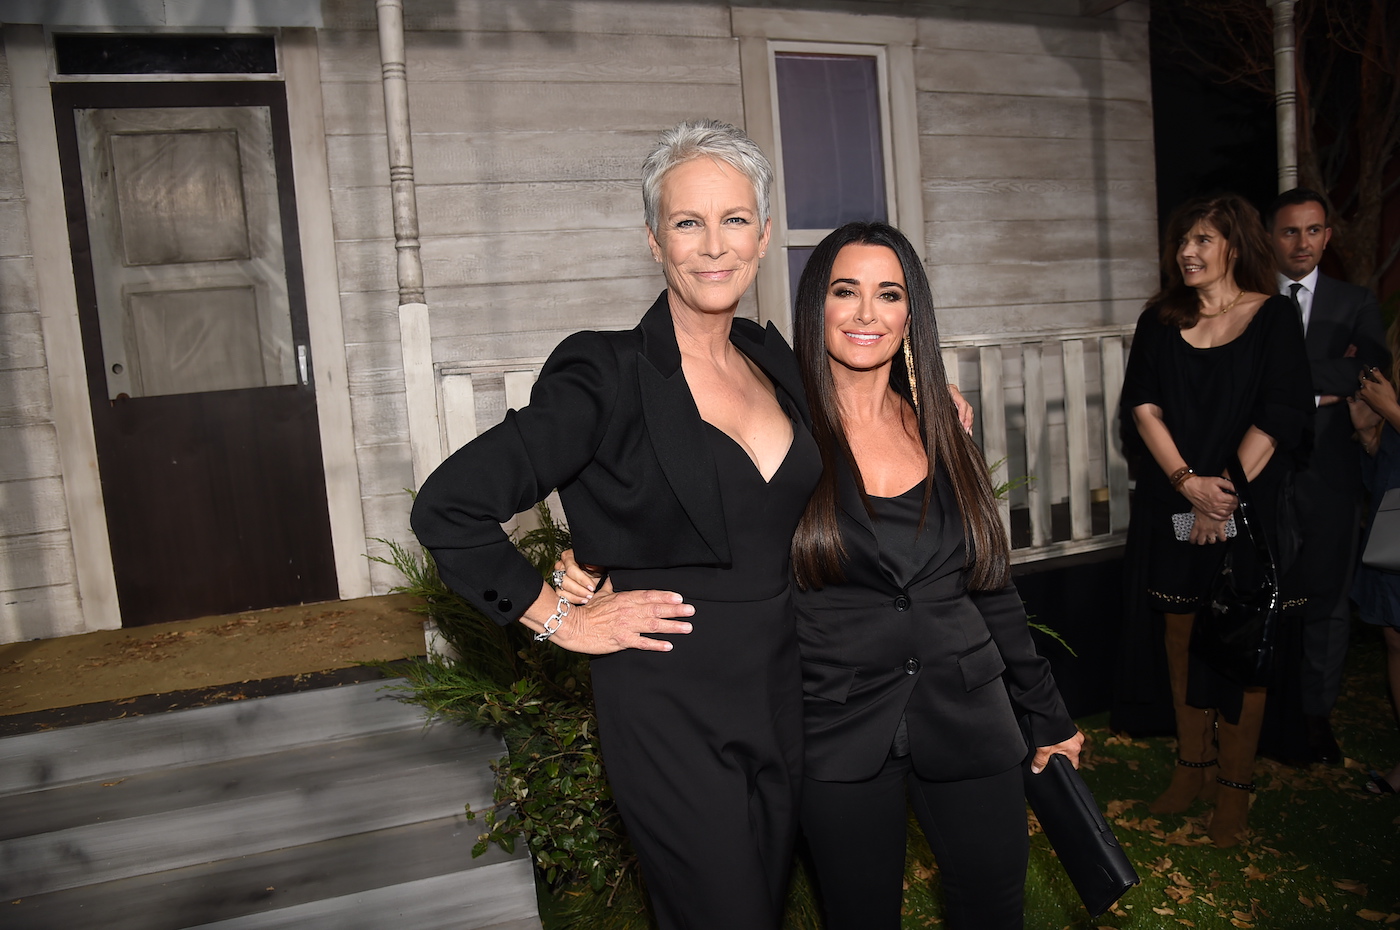 Jamie Lee Curtis and Kyle Richards attend the Universal Pictures' Halloween premiere in 2018